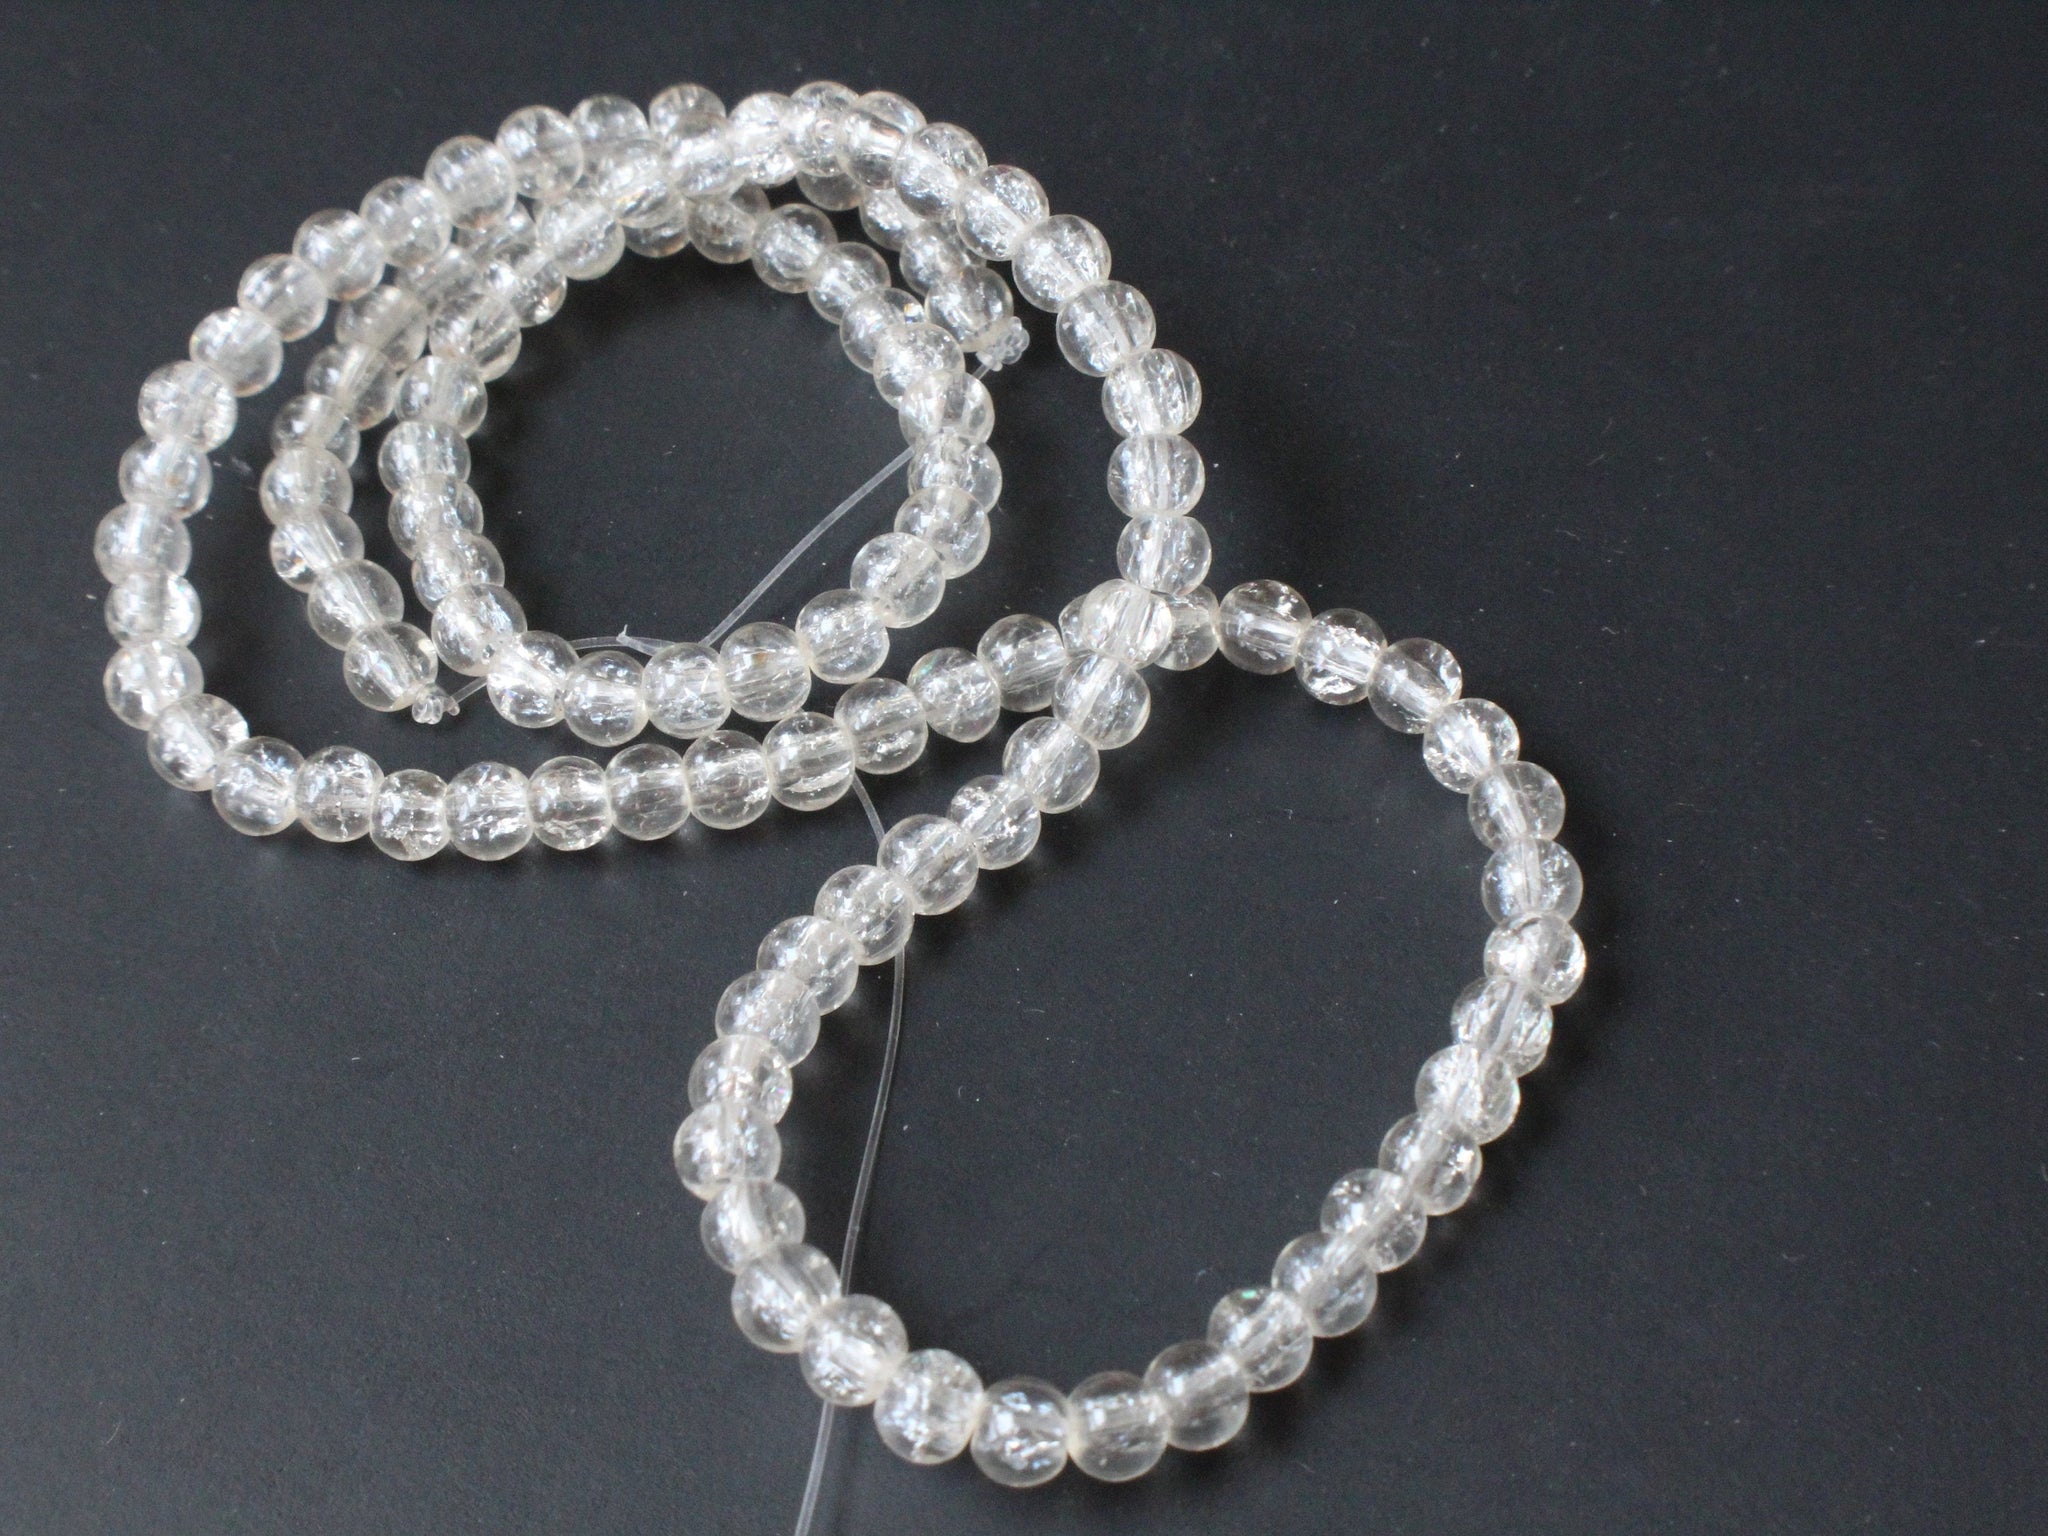 Ombre Round Cracked Glass Beads - 8mm